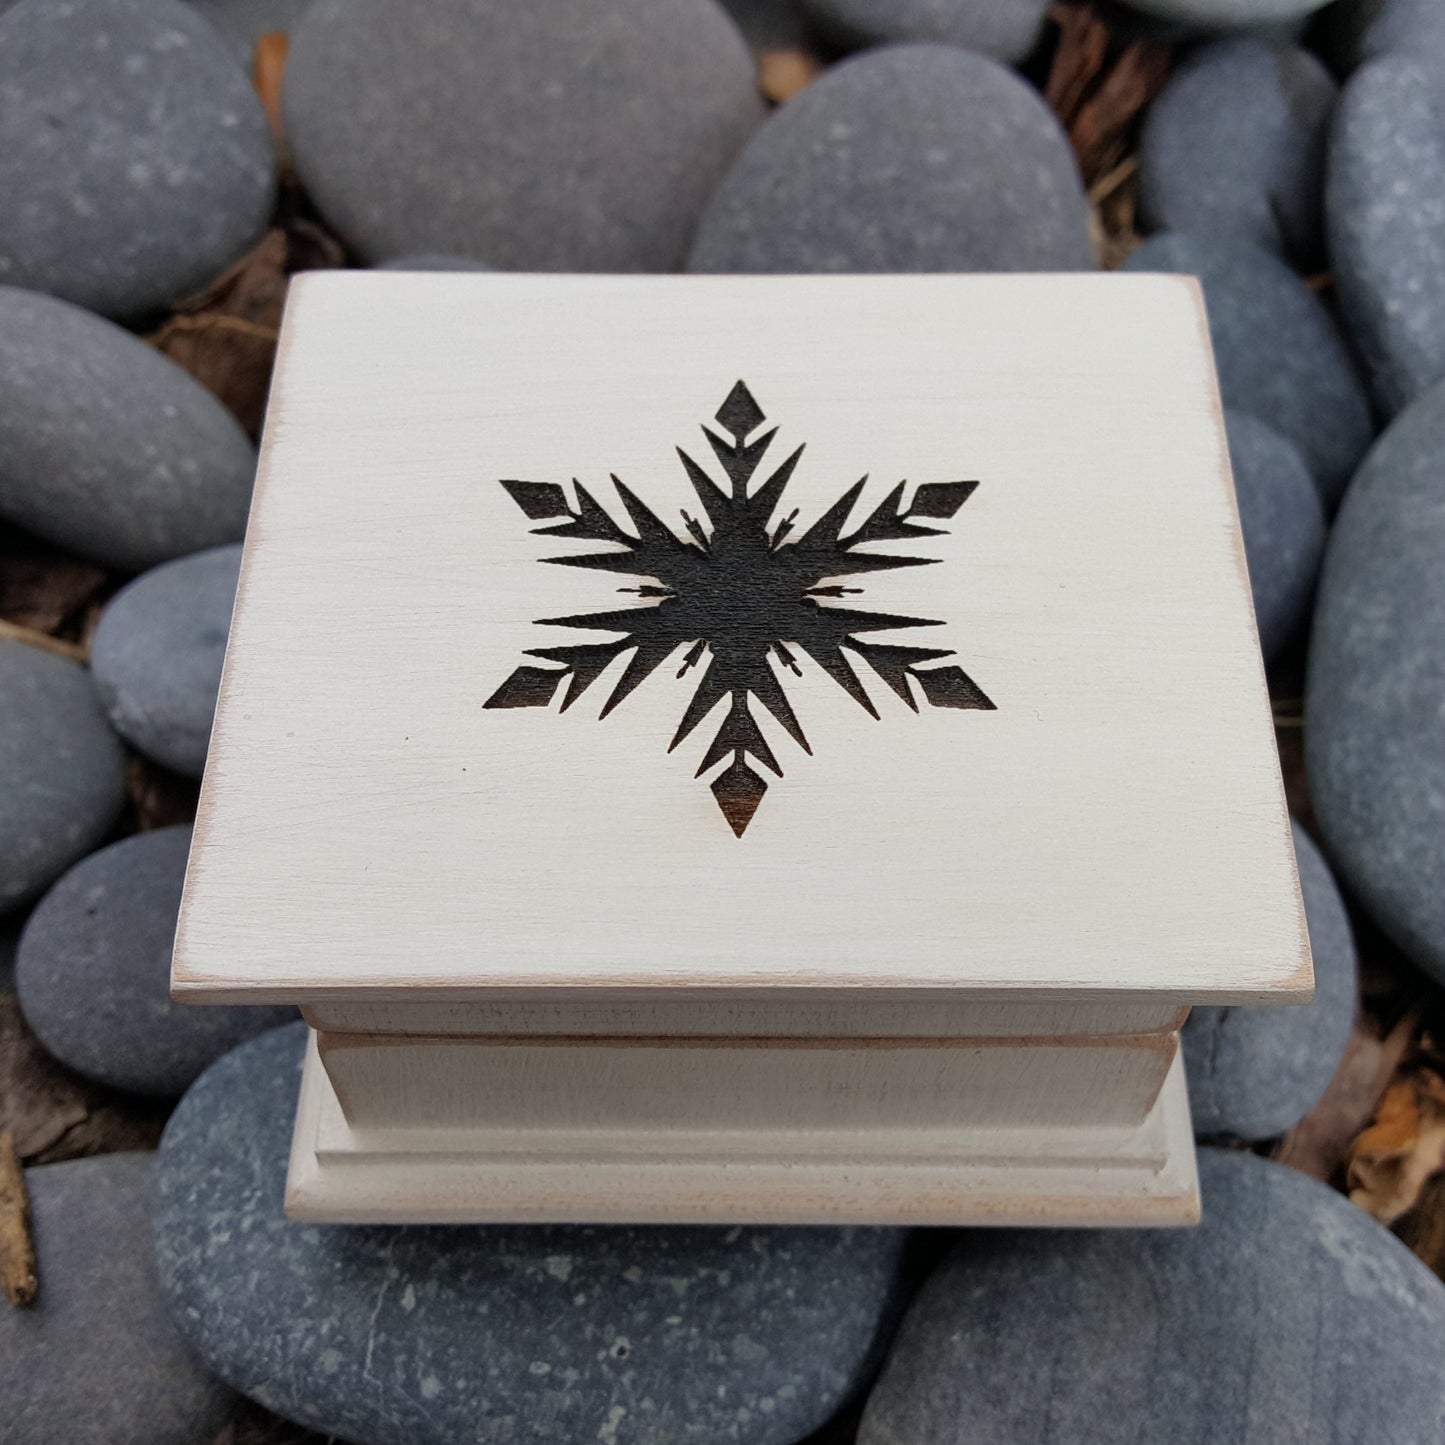 Snowflake Music box choose color and song, personalize